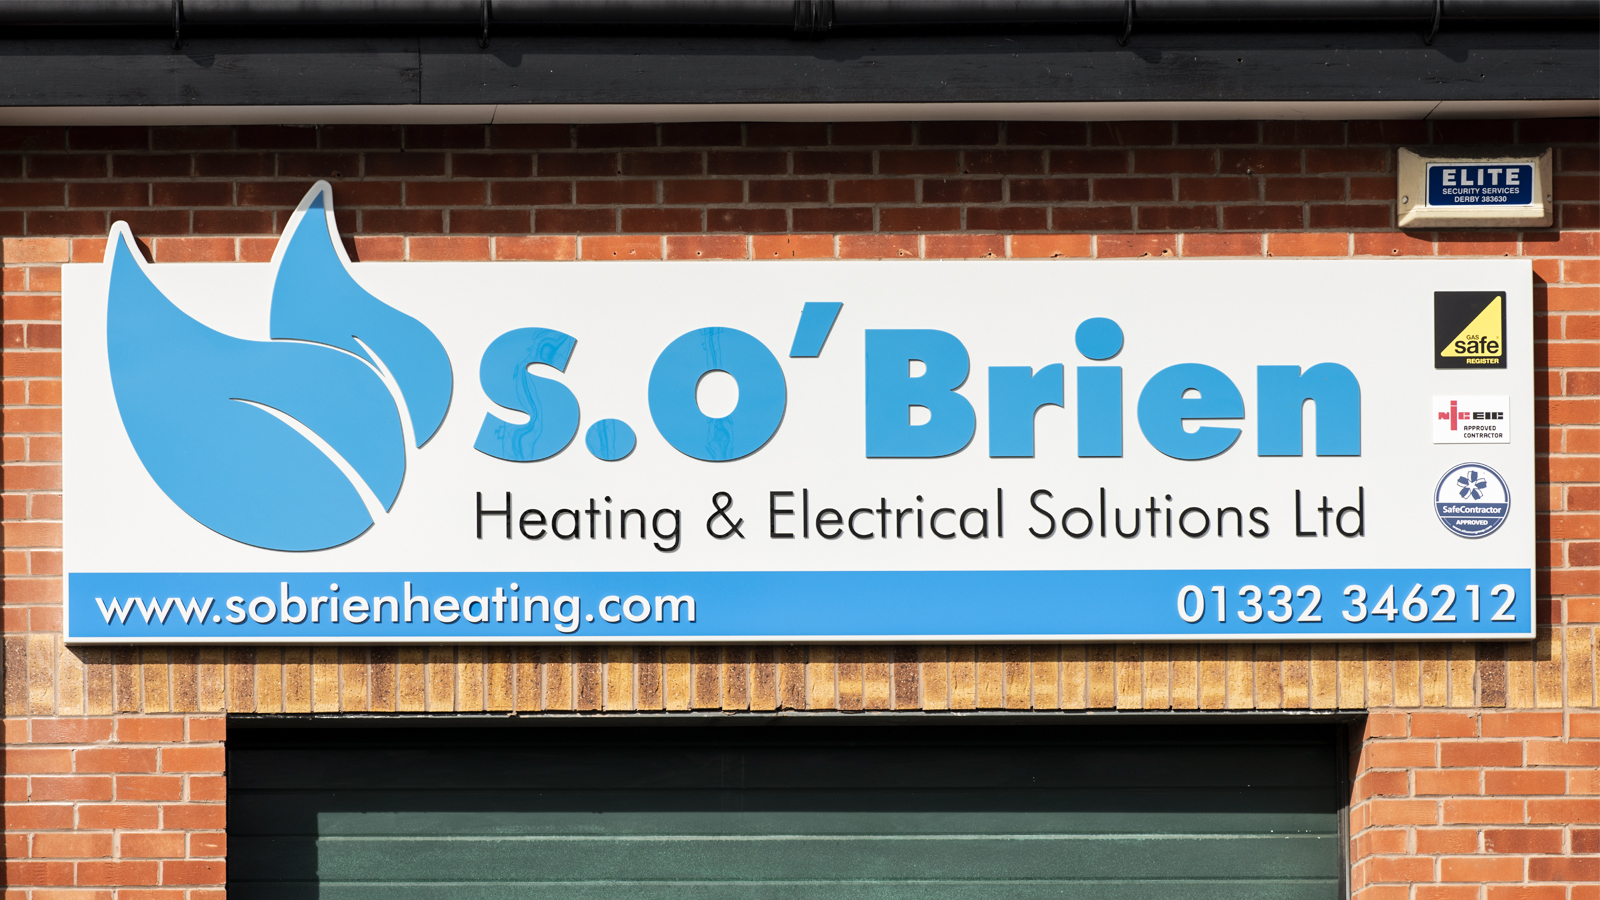 Local Heating & Electrical Business signage in Derby.